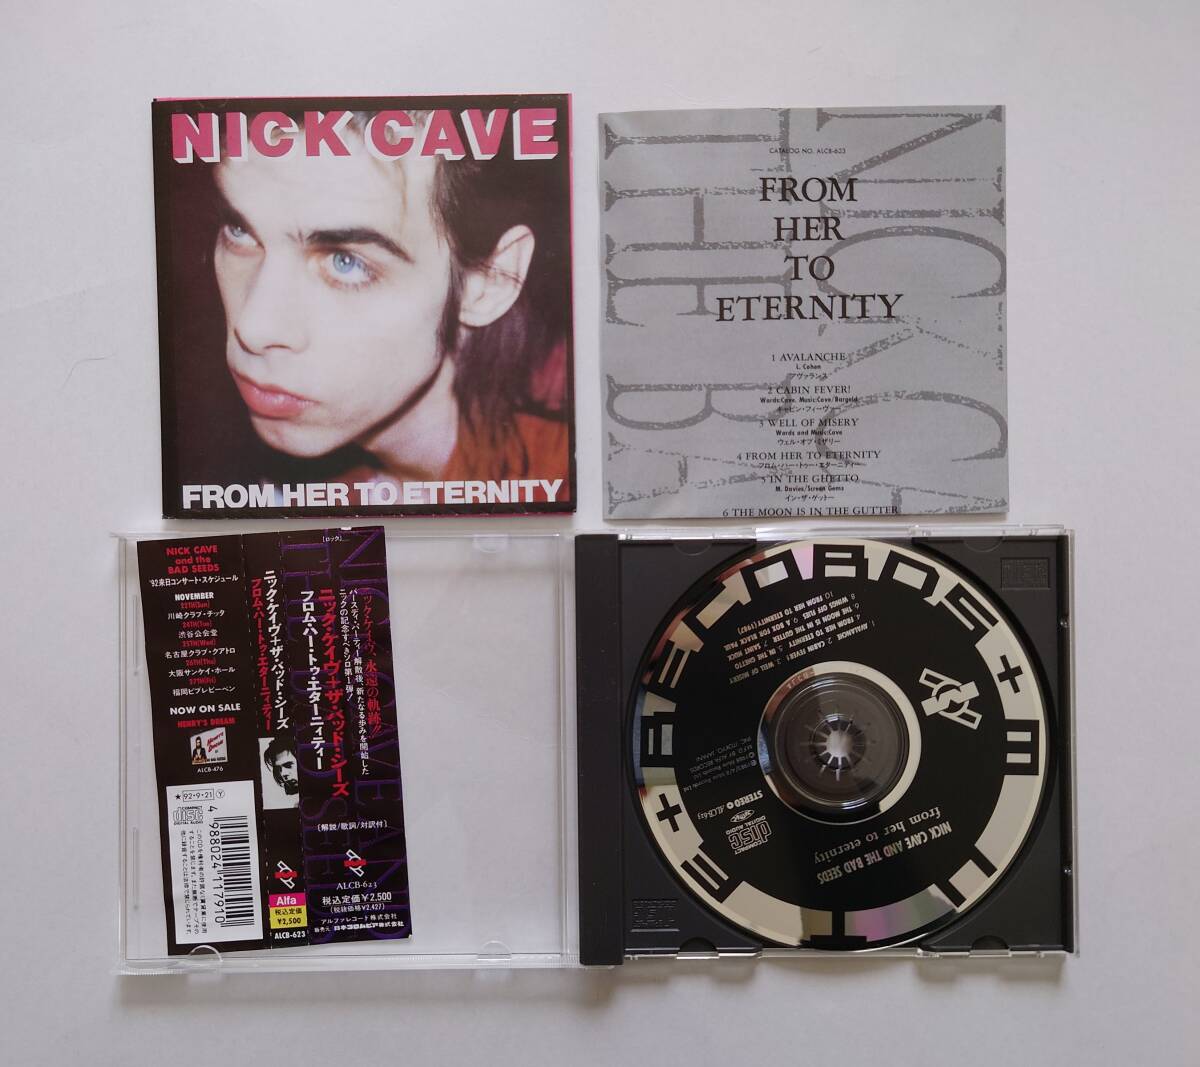 【CD】Nick Cave and the Bad Seeds ニック・ケイヴ＆ザ・バッド・シーズ 「From Her to Eternity」「Ghosteen」日本盤 帯/ライナーノーツ_画像2